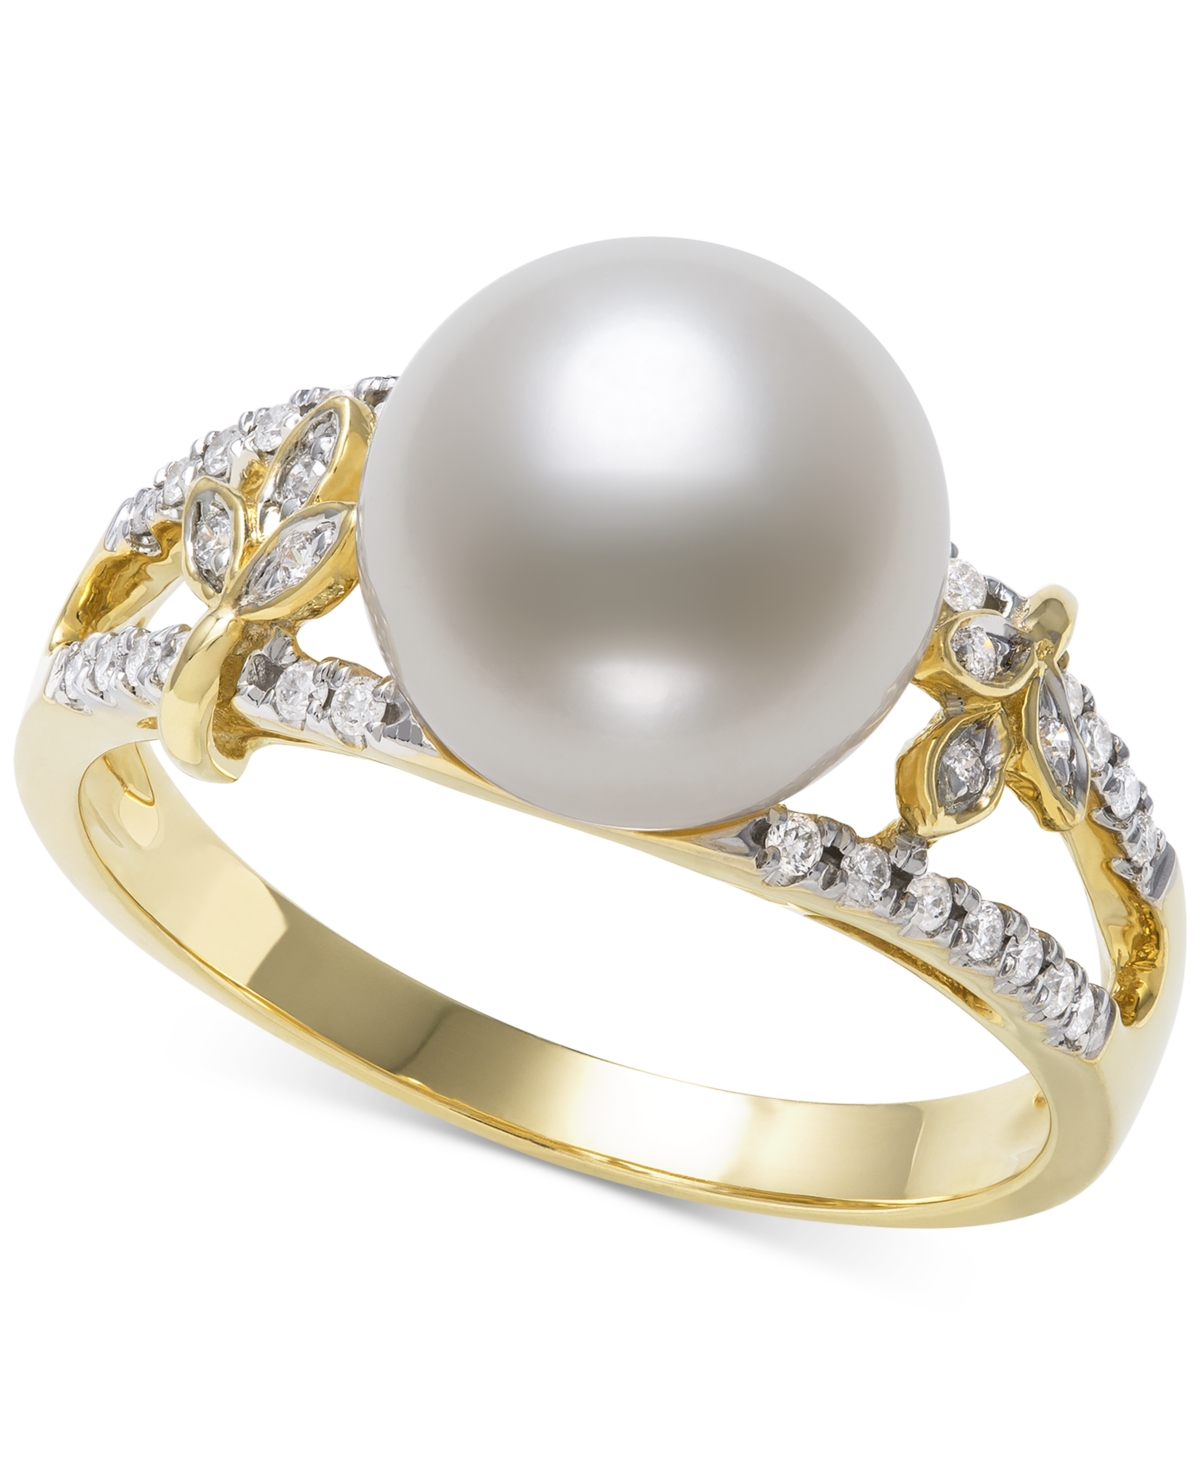 Cultured Freshwater Pearl (9mm) & Diamond (1/6 ct. t.w.) Openwork Ring in 14k Gold, Created for Macy's - Gold